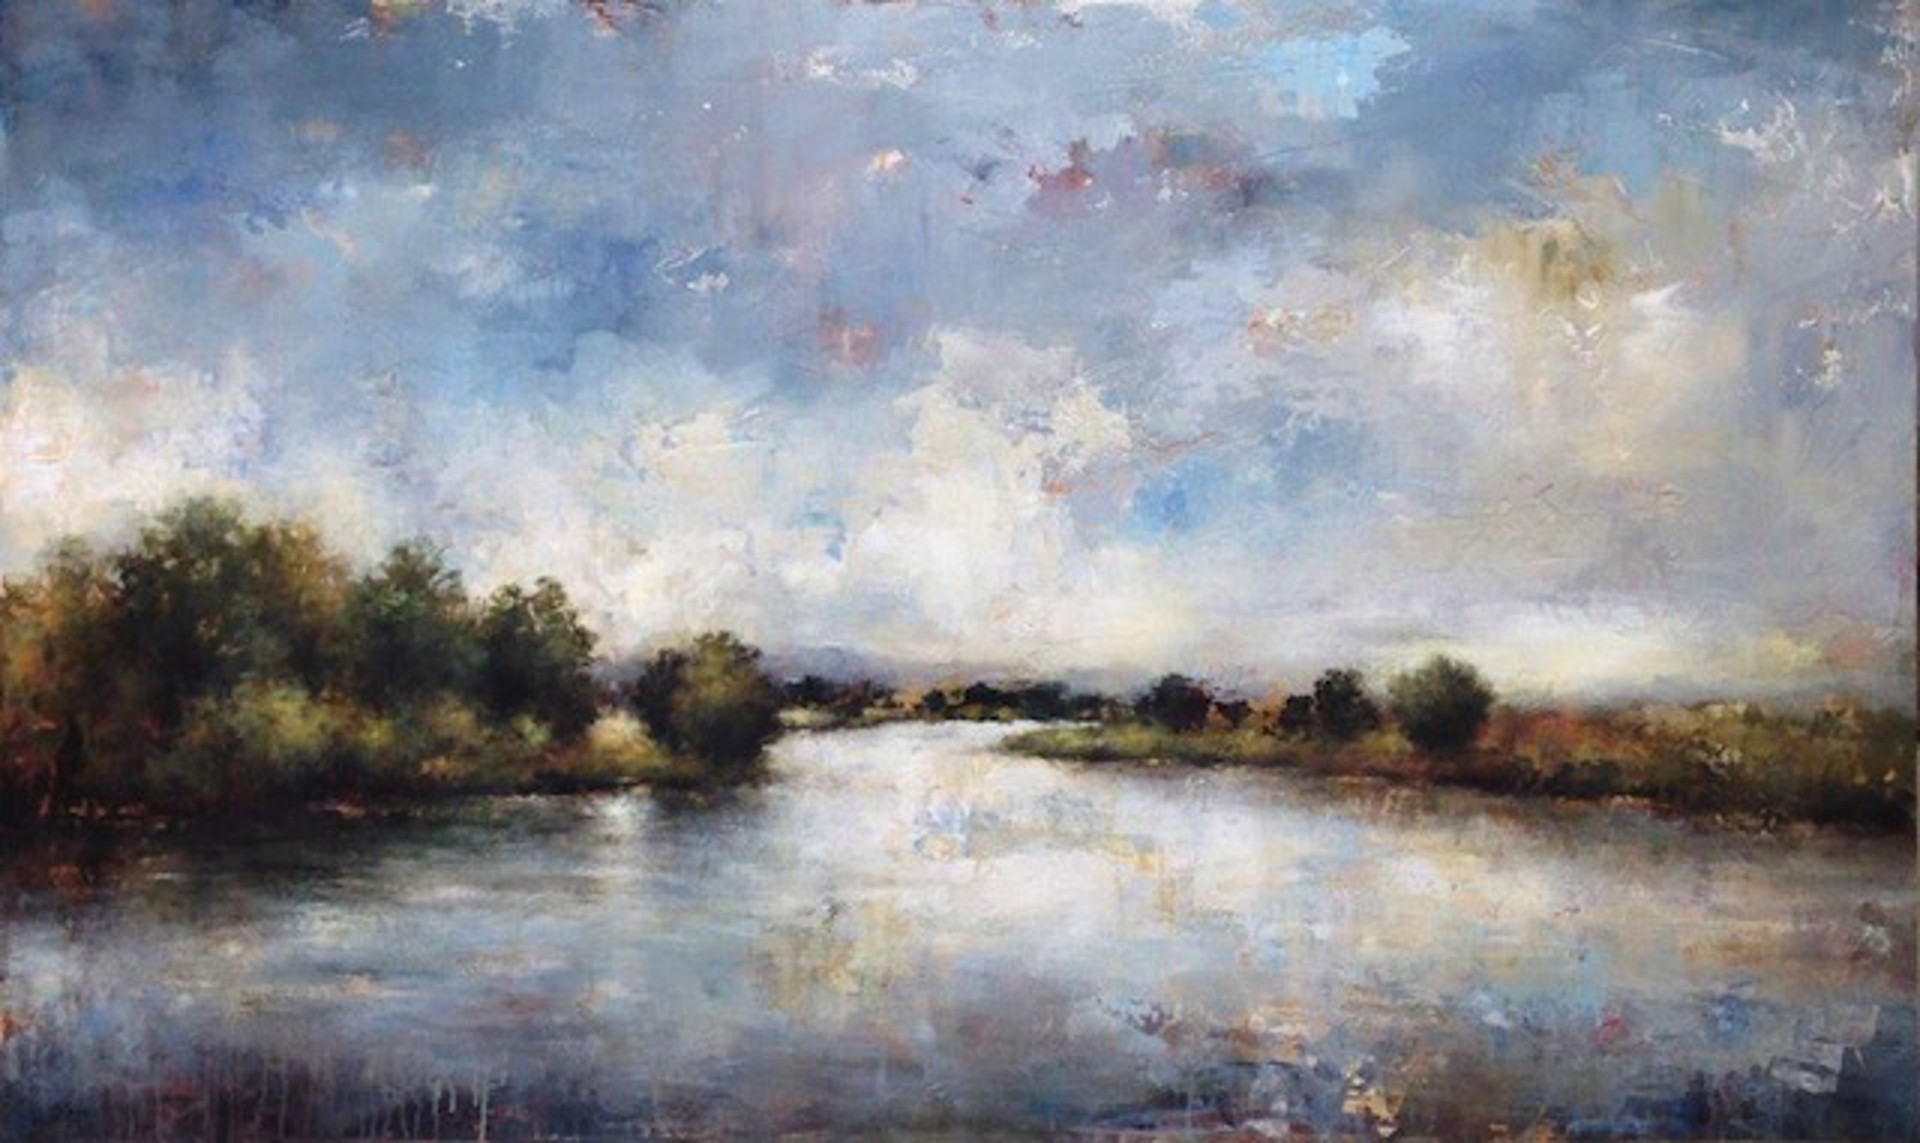 Bend in the River by Tracey Lane